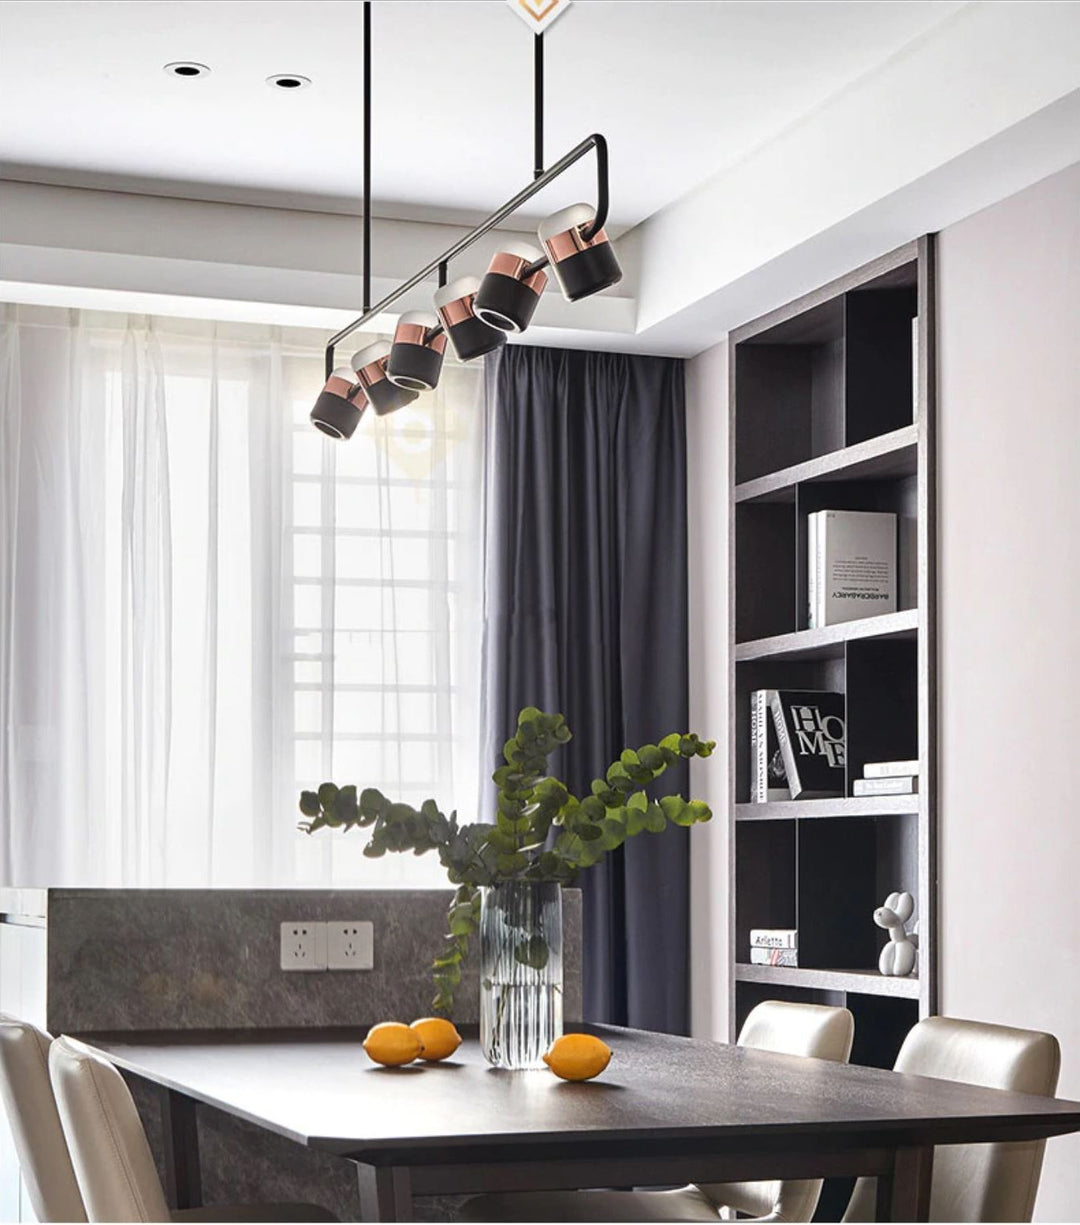 The Pendant Light--Acelofa Interior Lighting Online Shop offering beautifully designed interior lights and lamps